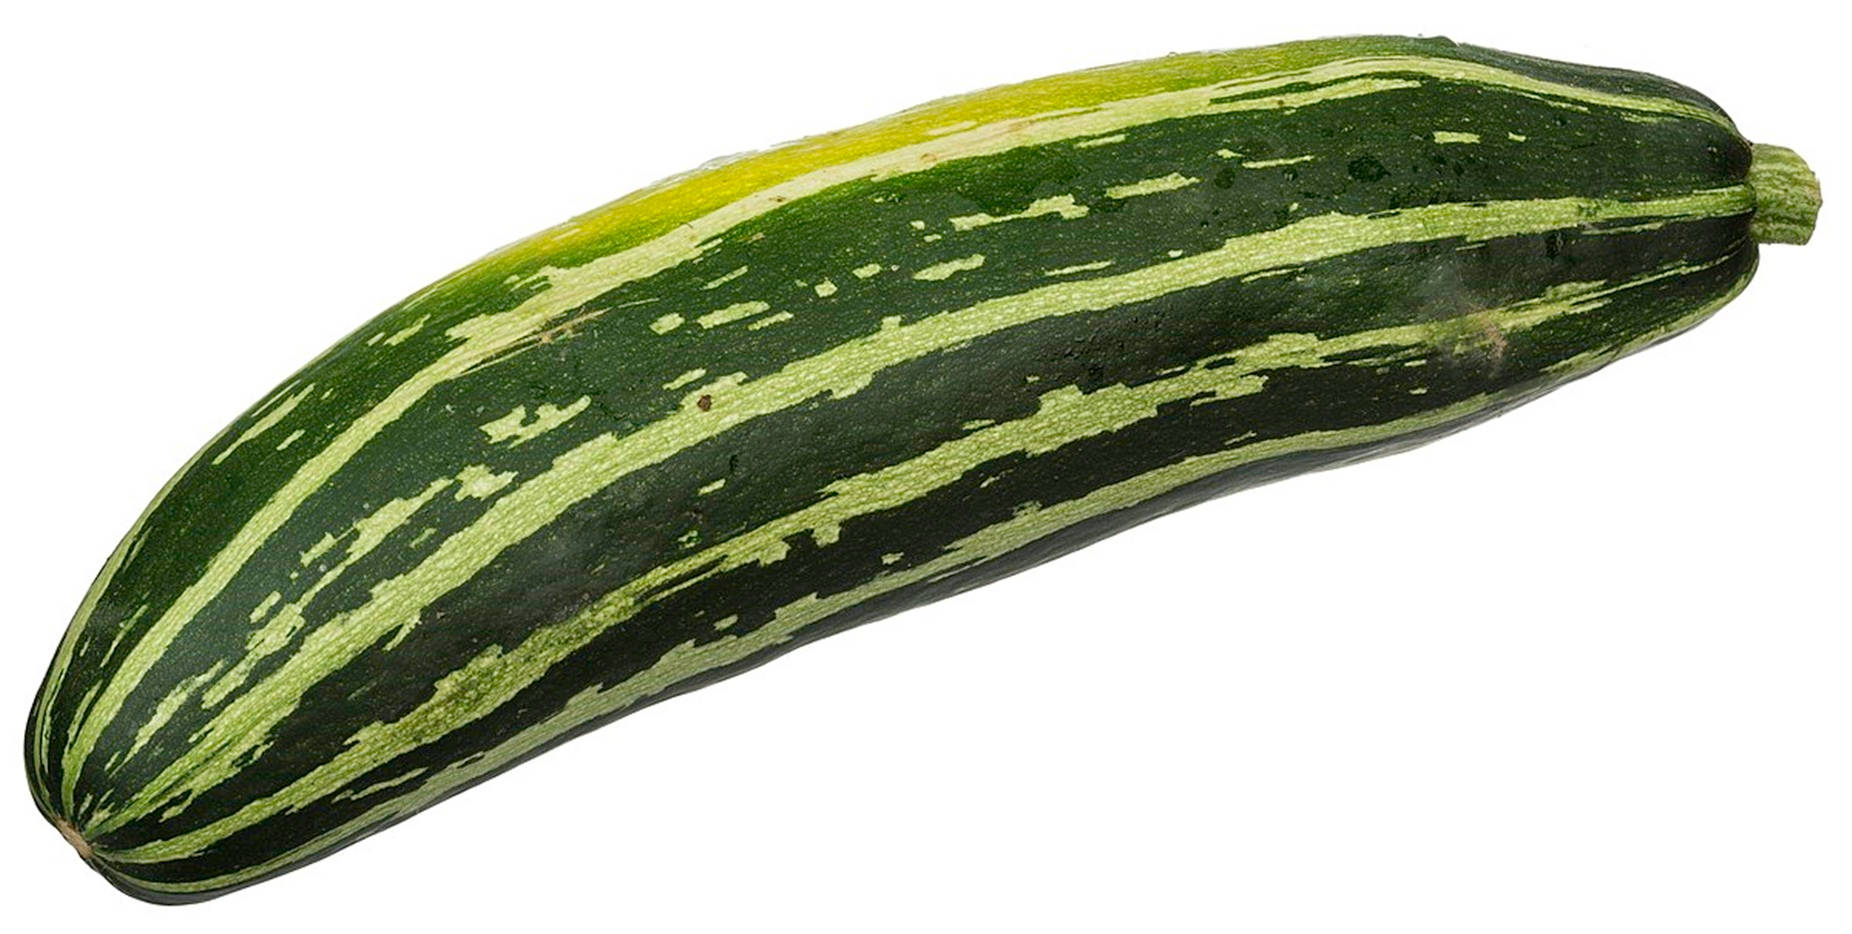 Zucchini Stripped Vegetable Variety Wallpaper